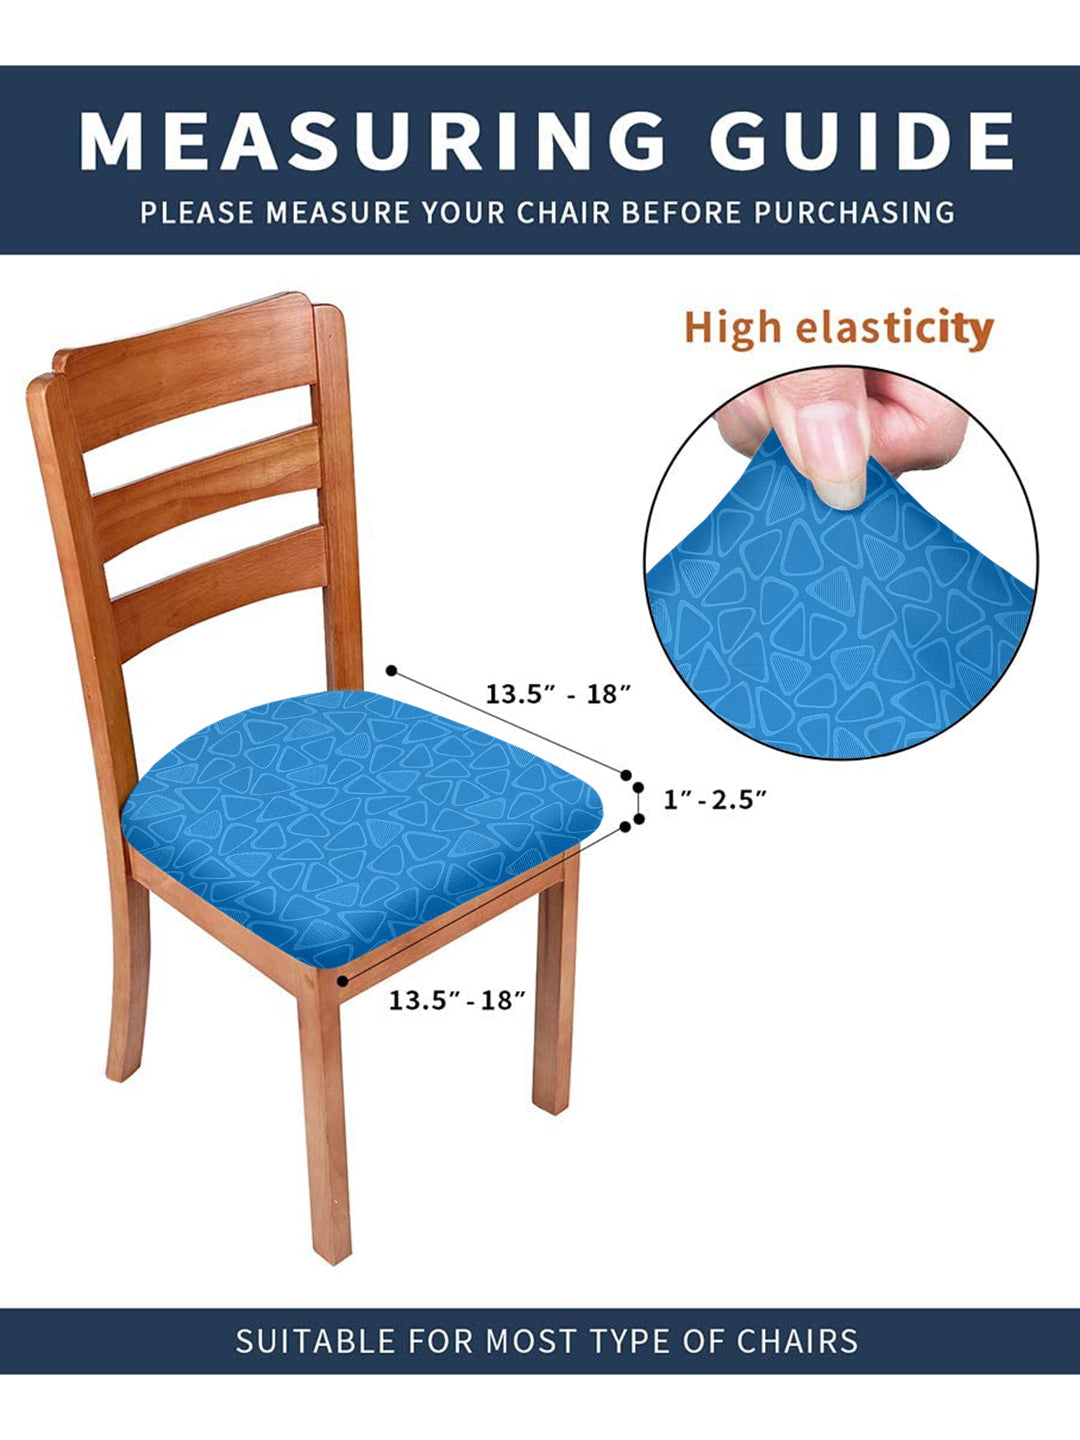 Stretchable Digital Printed Non Slip Chair Pad Cover Pack of 1- Blue